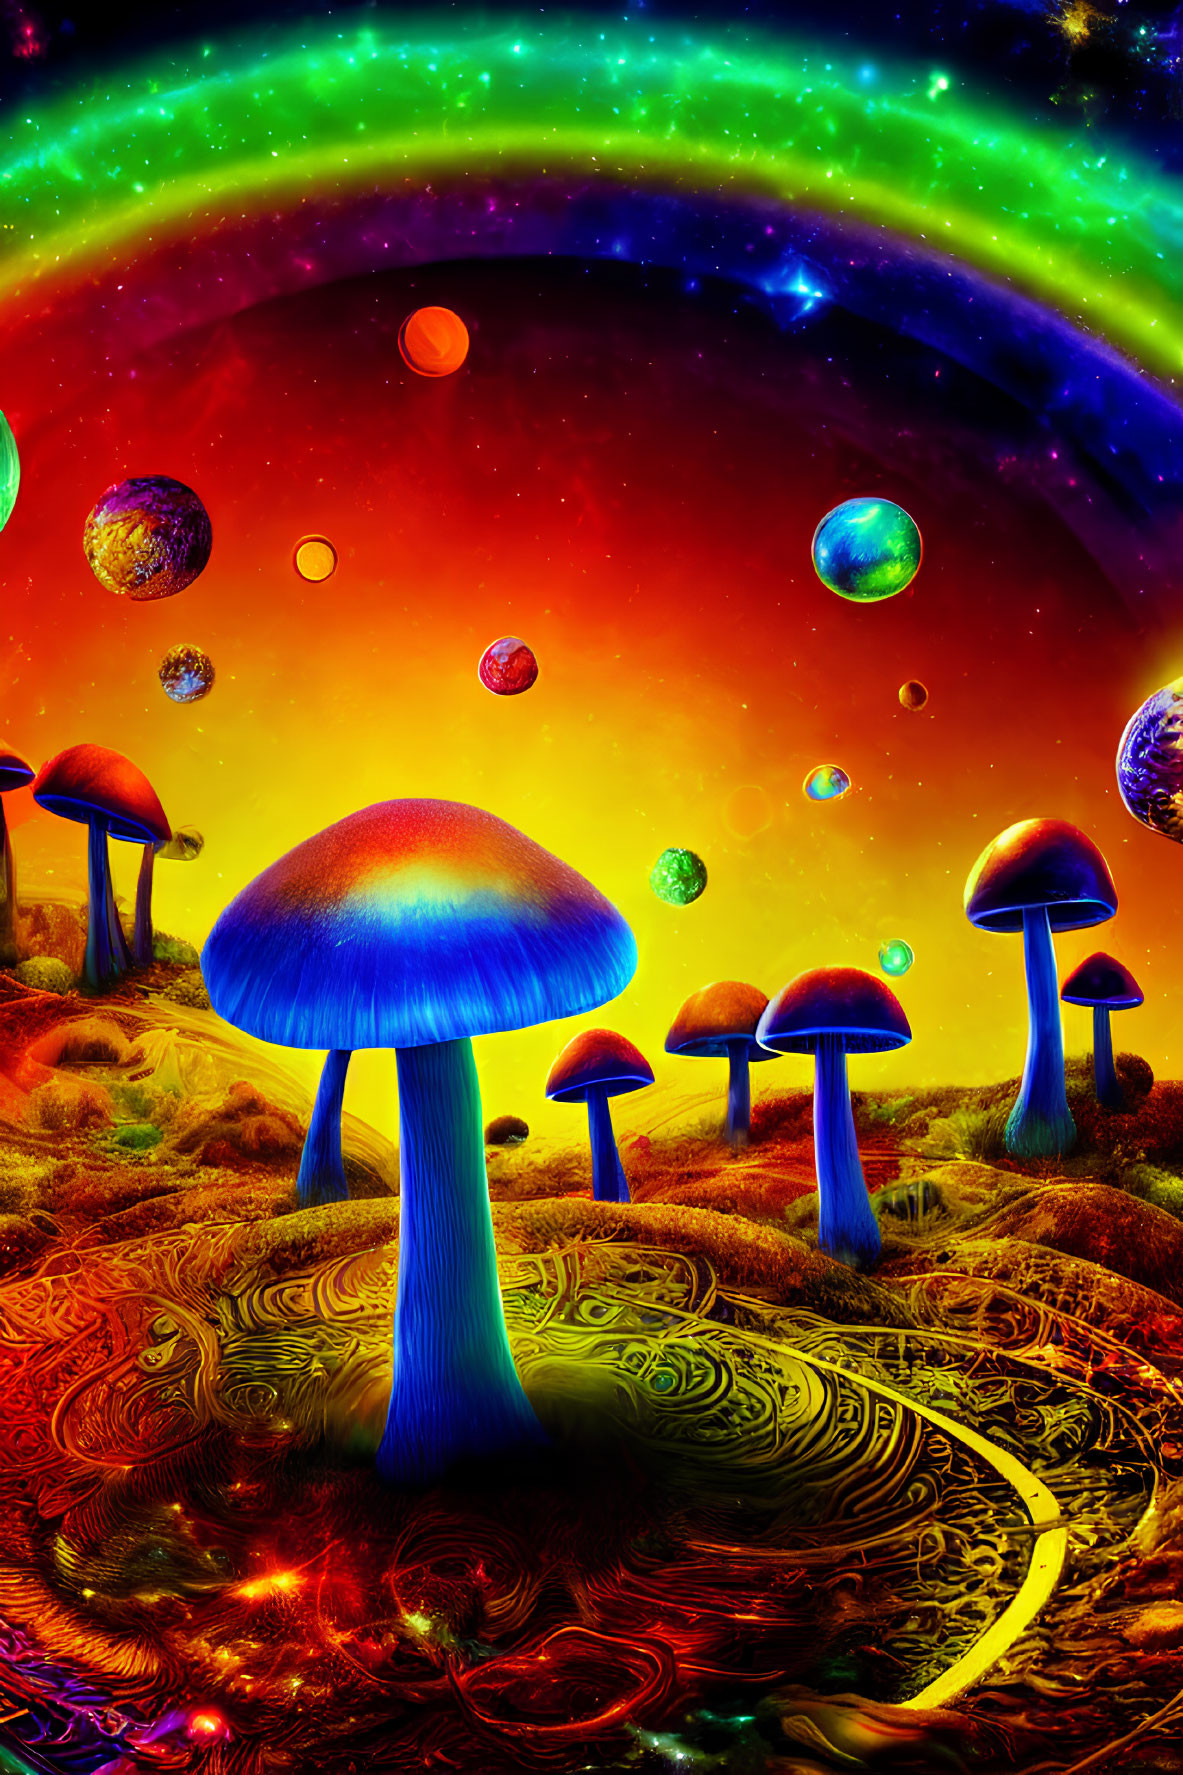 Colorful Psychedelic Mushroom Illustration with Cosmic Sky